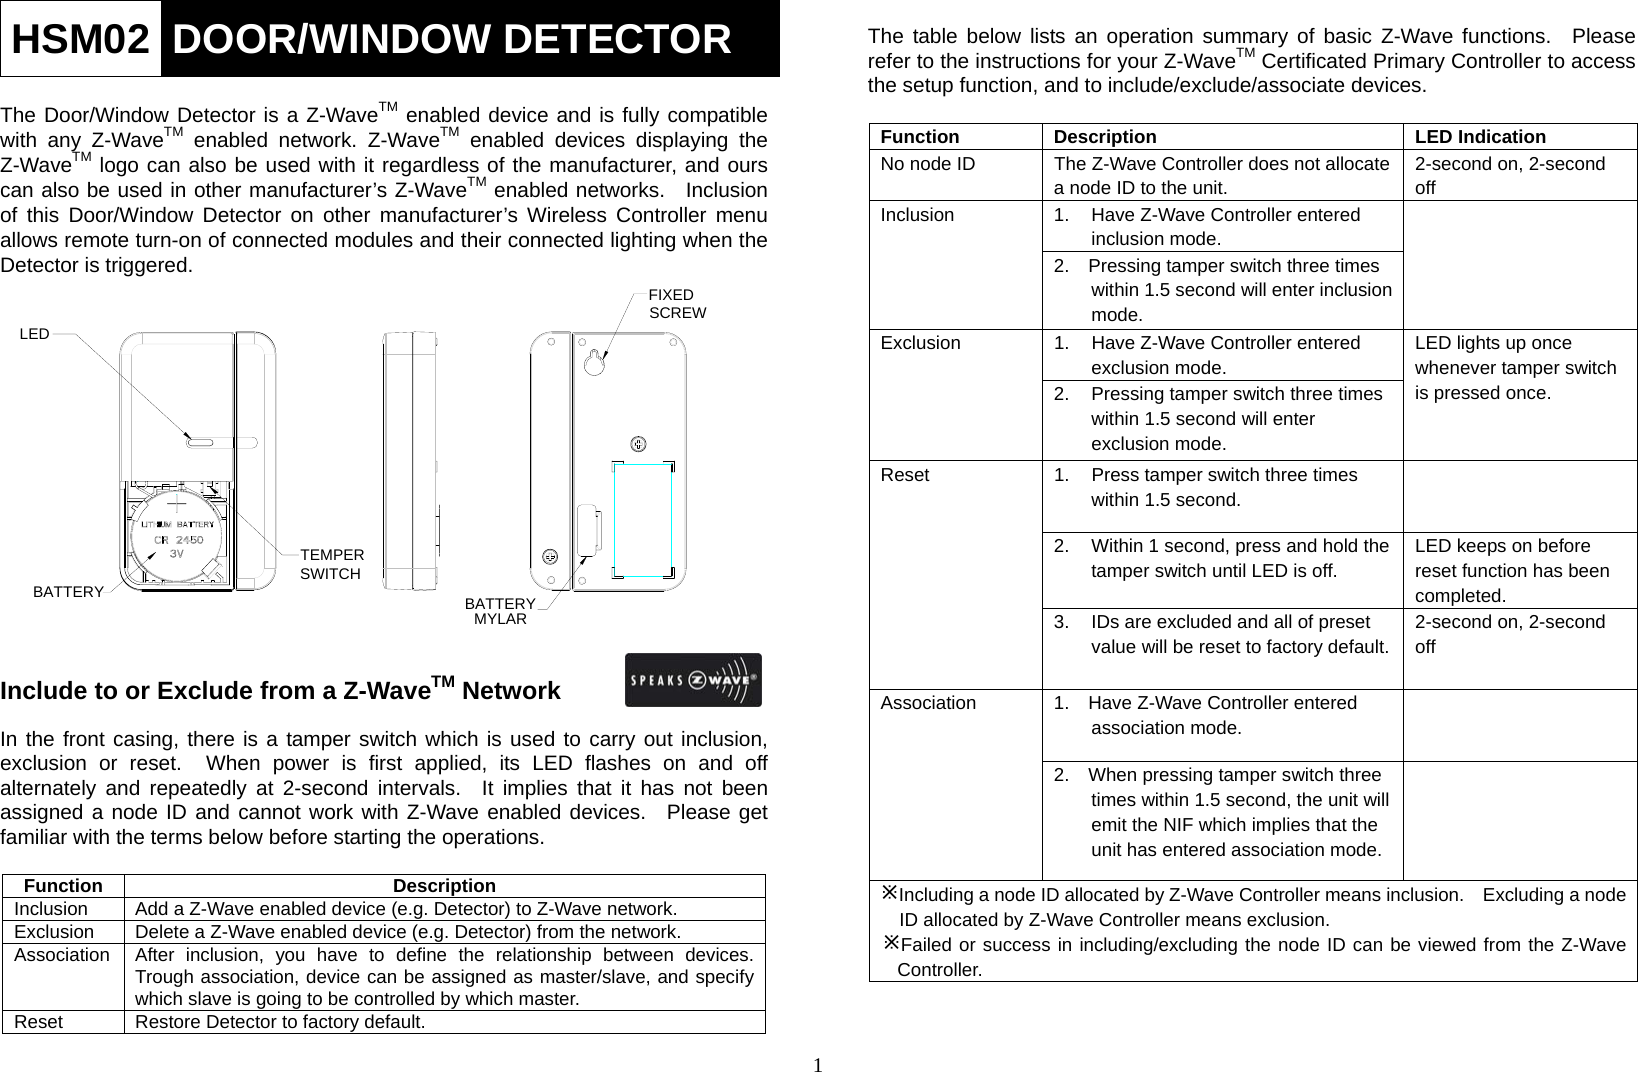 1 HSM02  DOOR/WINDOW DETECTOR  The Door/Window Detector is a Z-WaveTM enabled device and is fully compatible with any Z-WaveTM enabled network. Z-WaveTM enabled devices displaying the Z-WaveTM logo can also be used with it regardless of the manufacturer, and ours can also be used in other manufacturer’s Z-WaveTM enabled networks.  Inclusion of this Door/Window Detector on other manufacturer’s Wireless Controller menu allows remote turn-on of connected modules and their connected lighting when the Detector is triggered. LEDTEMPERSWITCHBATTERY BATTERYMYLARFIXEDSCREW  Include to or Exclude from a Z-WaveTM Network    In the front casing, there is a tamper switch which is used to carry out inclusion, exclusion or reset.  When power is first applied, its LED flashes on and off alternately and repeatedly at 2-second intervals.  It implies that it has not been assigned a node ID and cannot work with Z-Wave enabled devices.  Please get familiar with the terms below before starting the operations.      Function Description Inclusion   Add a Z-Wave enabled device (e.g. Detector) to Z-Wave network. Exclusion   Delete a Z-Wave enabled device (e.g. Detector) from the network. Association   After inclusion, you have to define the relationship between devices. Trough association, device can be assigned as master/slave, and specify which slave is going to be controlled by which master. Reset Restore Detector to factory default.  The table below lists an operation summary of basic Z-Wave functions.  Please refer to the instructions for your Z-WaveTM Certificated Primary Controller to access the setup function, and to include/exclude/associate devices.    Function Description  LED Indication No node ID  The Z-Wave Controller does not allocate a node ID to the unit. 2-second on, 2-second off Inclusion  1.  Have Z-Wave Controller entered inclusion mode.  2.    Pressing tamper switch three times within 1.5 second will enter inclusion mode. Exclusion  1.  Have Z-Wave Controller entered exclusion mode. LED lights up once whenever tamper switch is pressed once. 2.  Pressing tamper switch three times within 1.5 second will enter exclusion mode. Reset  1.  Press tamper switch three times within 1.5 second.  2.  Within 1 second, press and hold the tamper switch until LED is off. LED keeps on before reset function has been completed. 3.  IDs are excluded and all of preset value will be reset to factory default.2-second on, 2-second off Association  1.    Have Z-Wave Controller entered association mode.  2.    When pressing tamper switch three times within 1.5 second, the unit will emit the NIF which implies that the unit has entered association mode.  ÚIncluding a node ID allocated by Z-Wave Controller means inclusion.    Excluding a node ID allocated by Z-Wave Controller means exclusion. ÚFailed or success in including/excluding the node ID can be viewed from the Z-Wave Controller.  